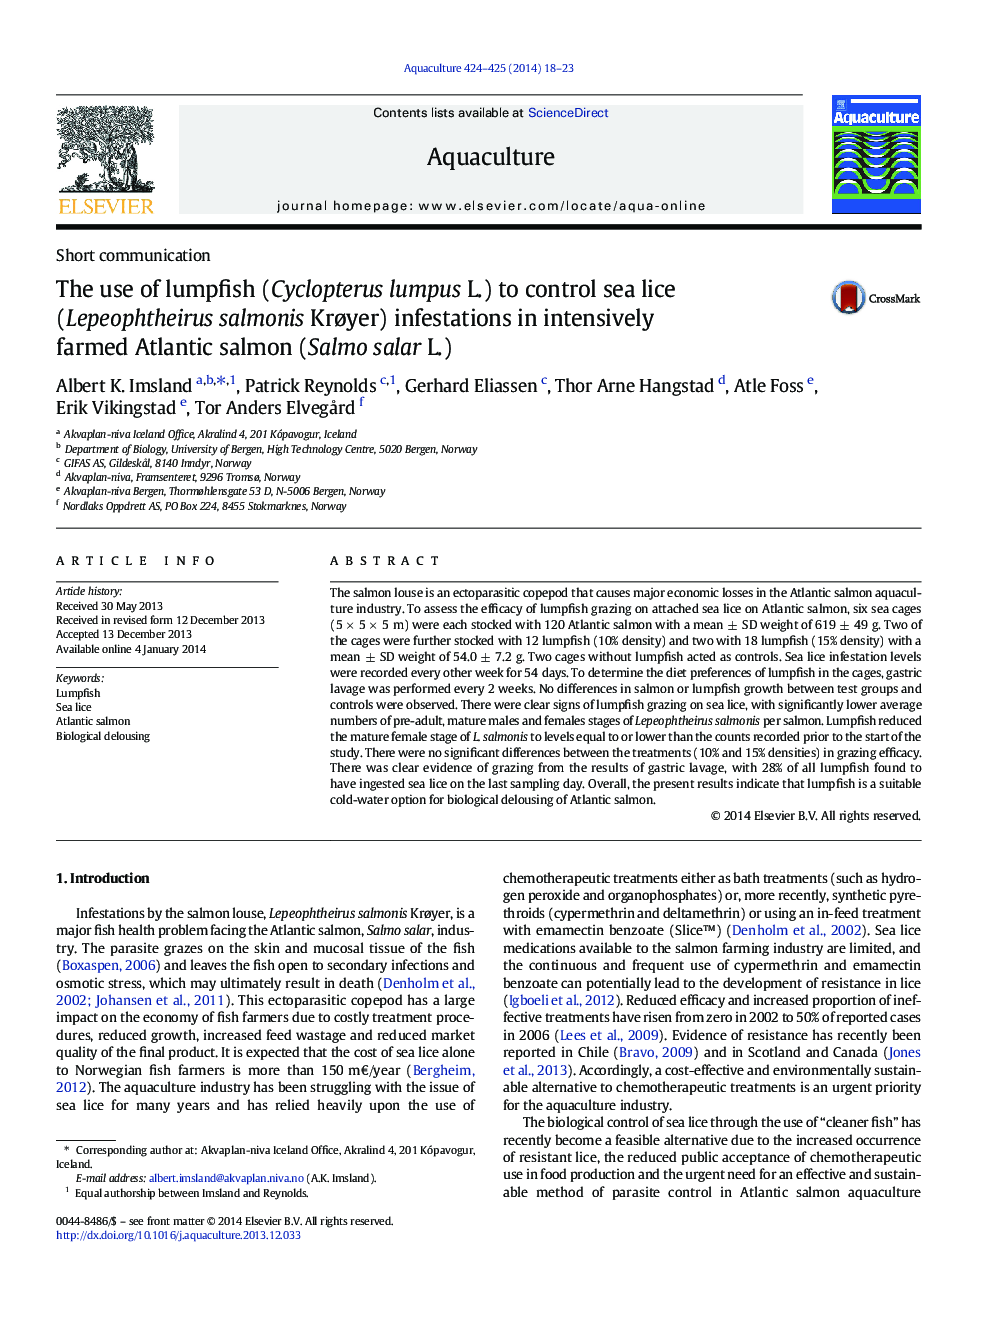 The use of lumpfish (Cyclopterus lumpus L.) to control sea lice (Lepeophtheirus salmonis KrÃ¸yer) infestations in intensively farmed Atlantic salmon (Salmo salar L.)